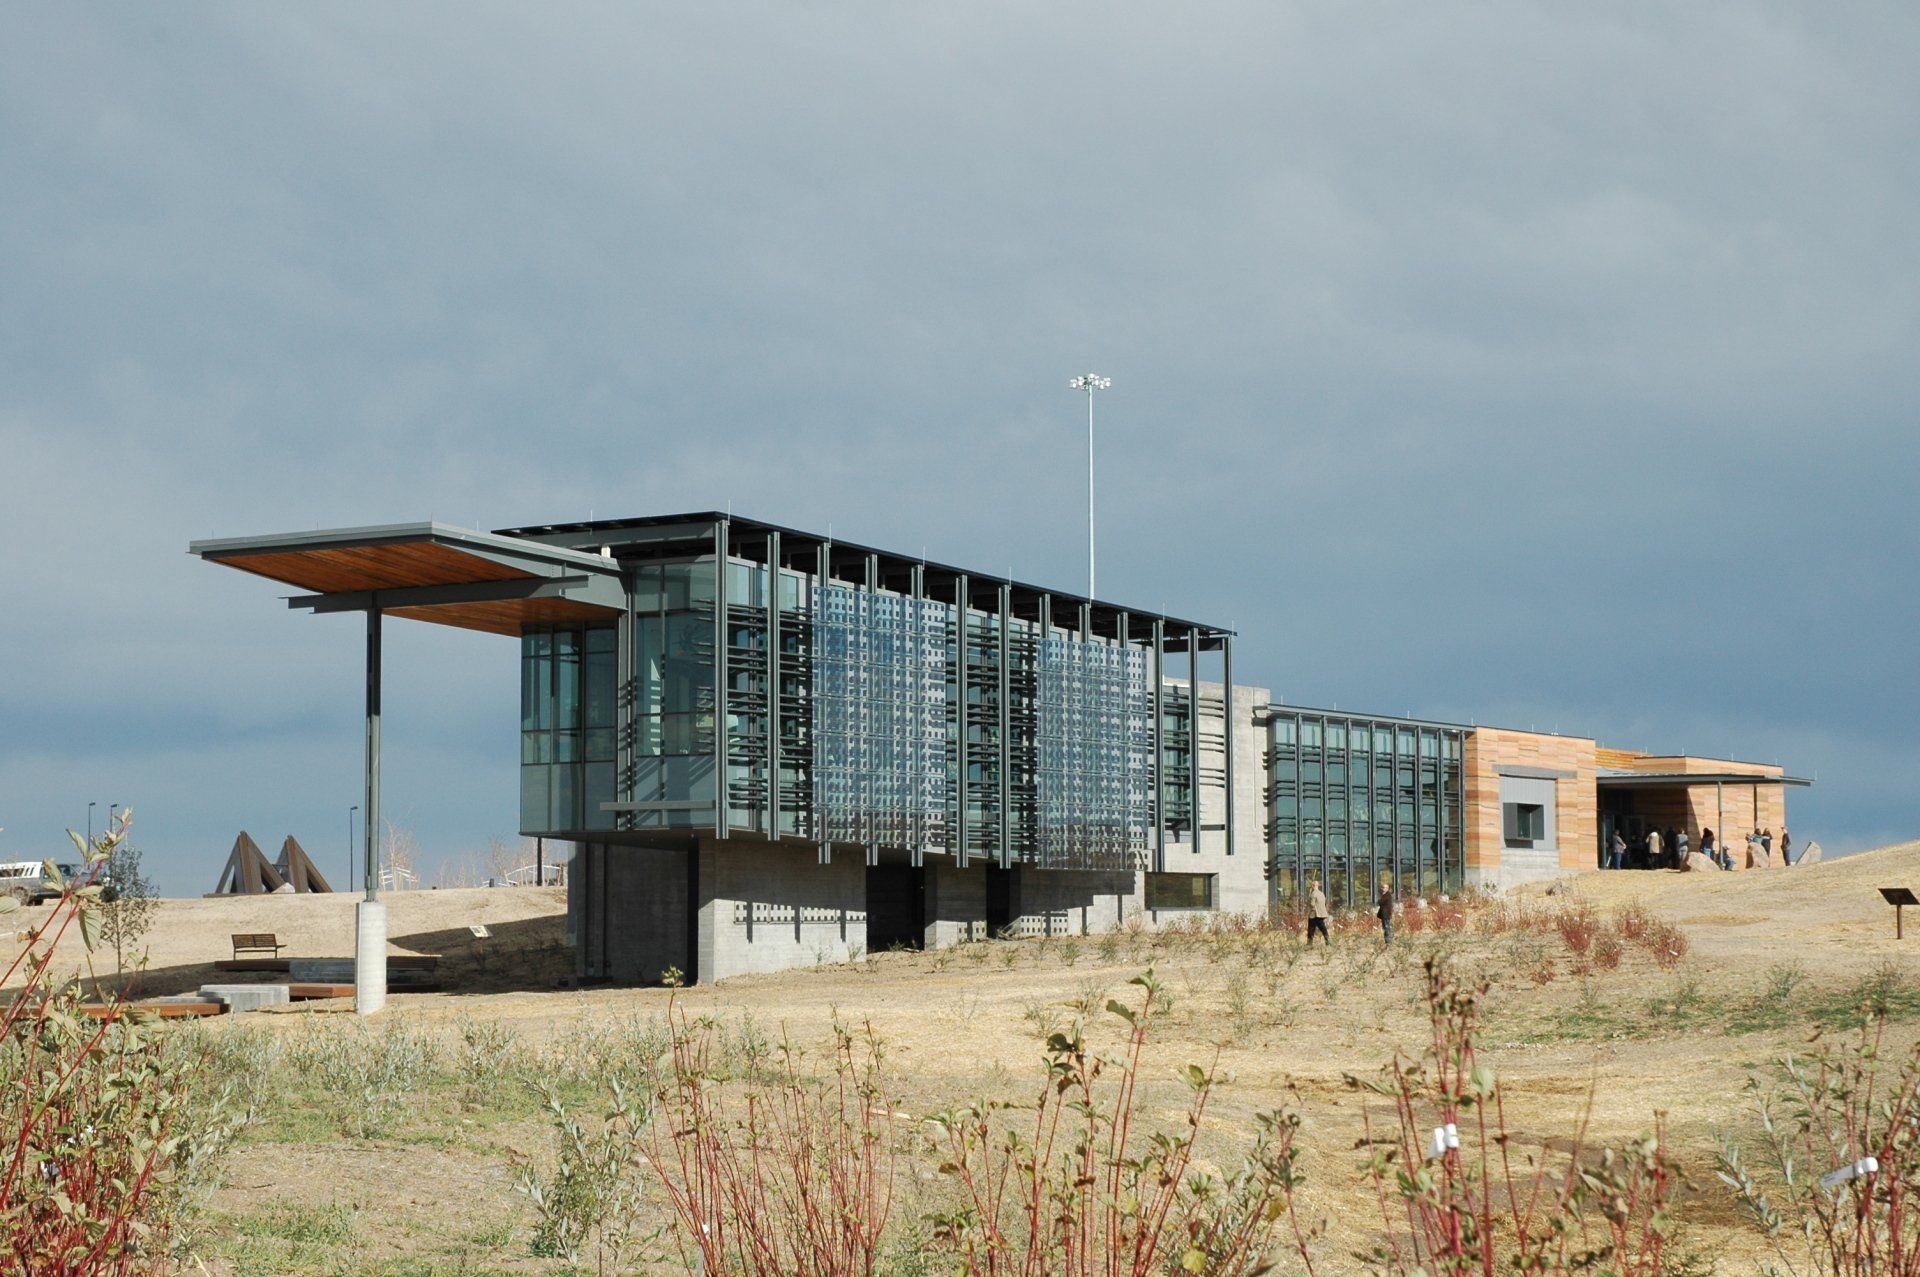 modern, cantilevered side of Southeast Wyoming Welcome Center